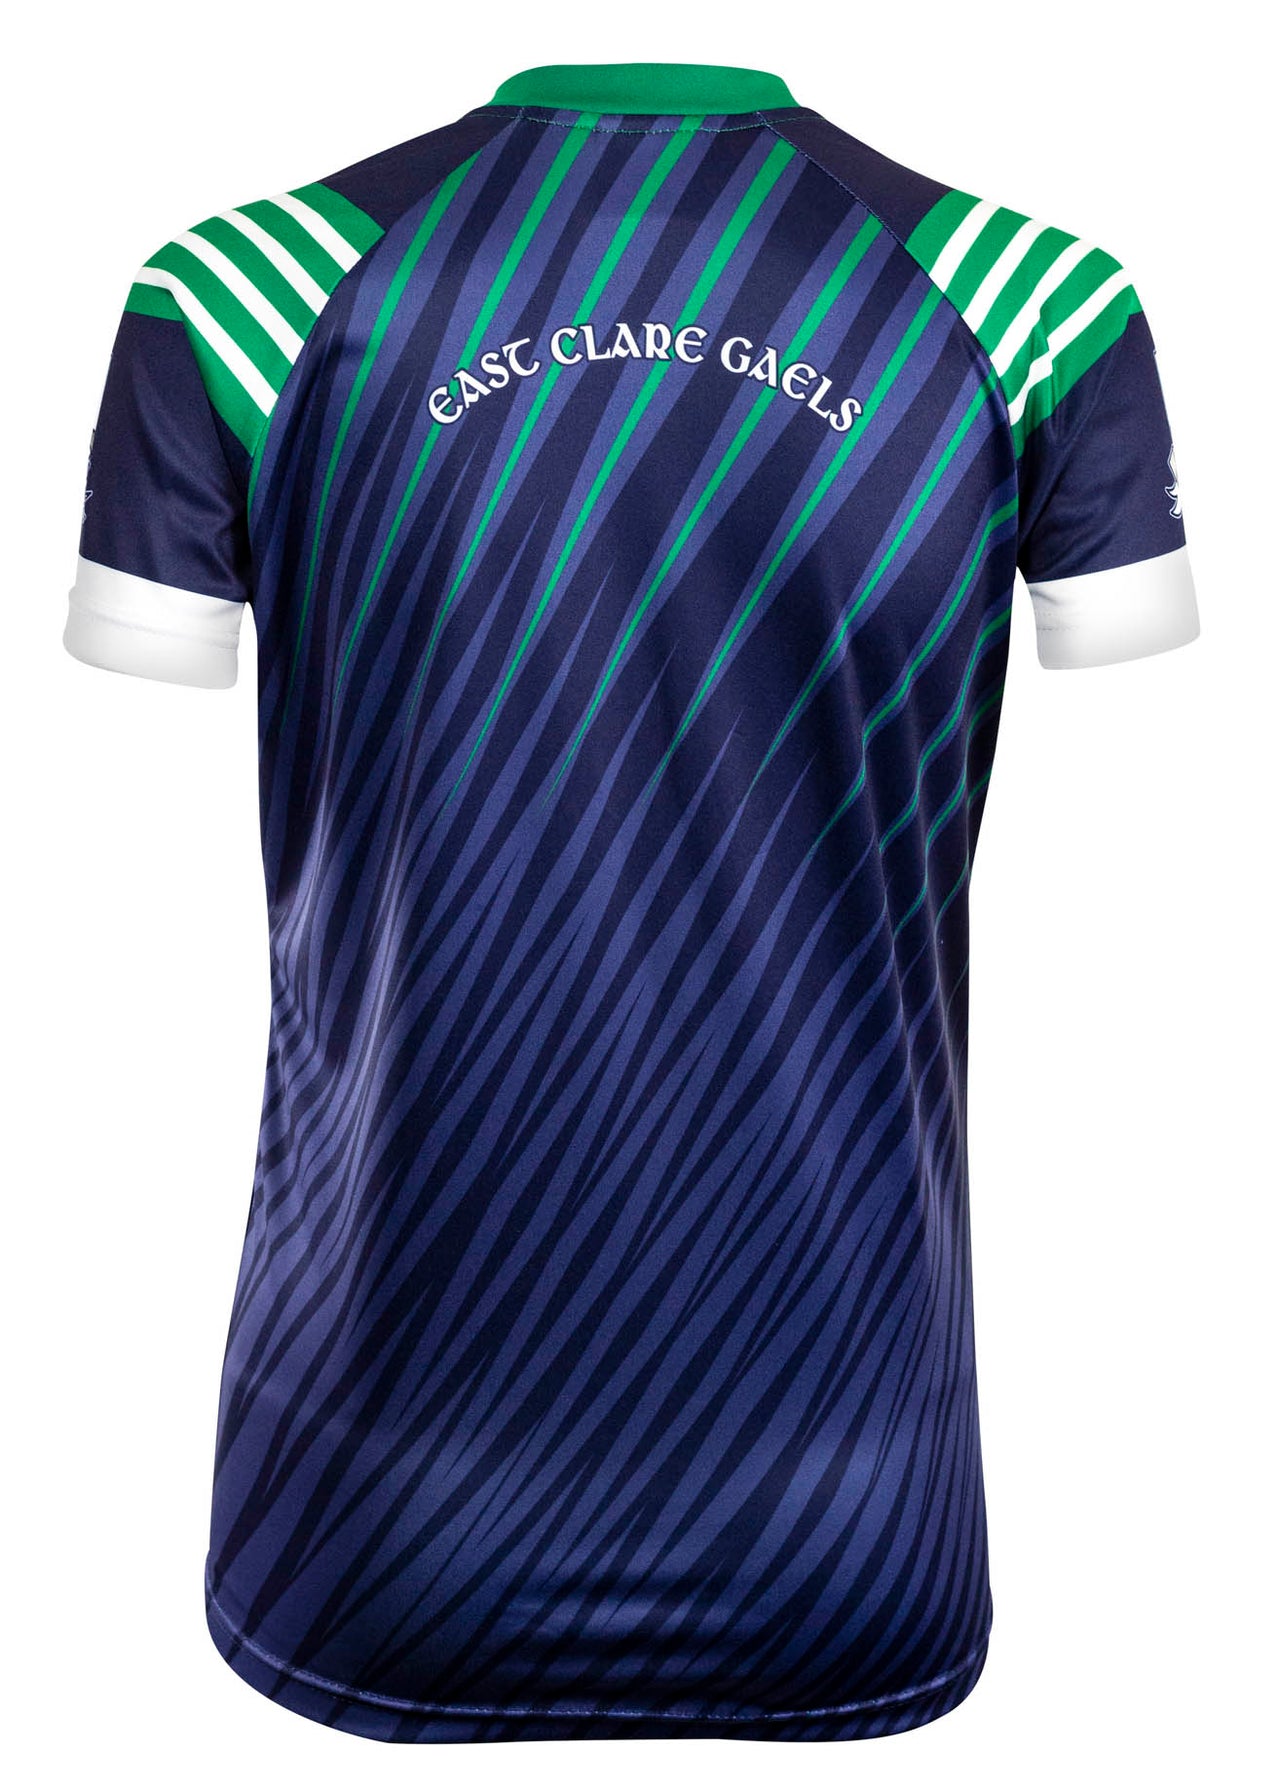 East Clare Gaels Training Jersey Player Fit Adult